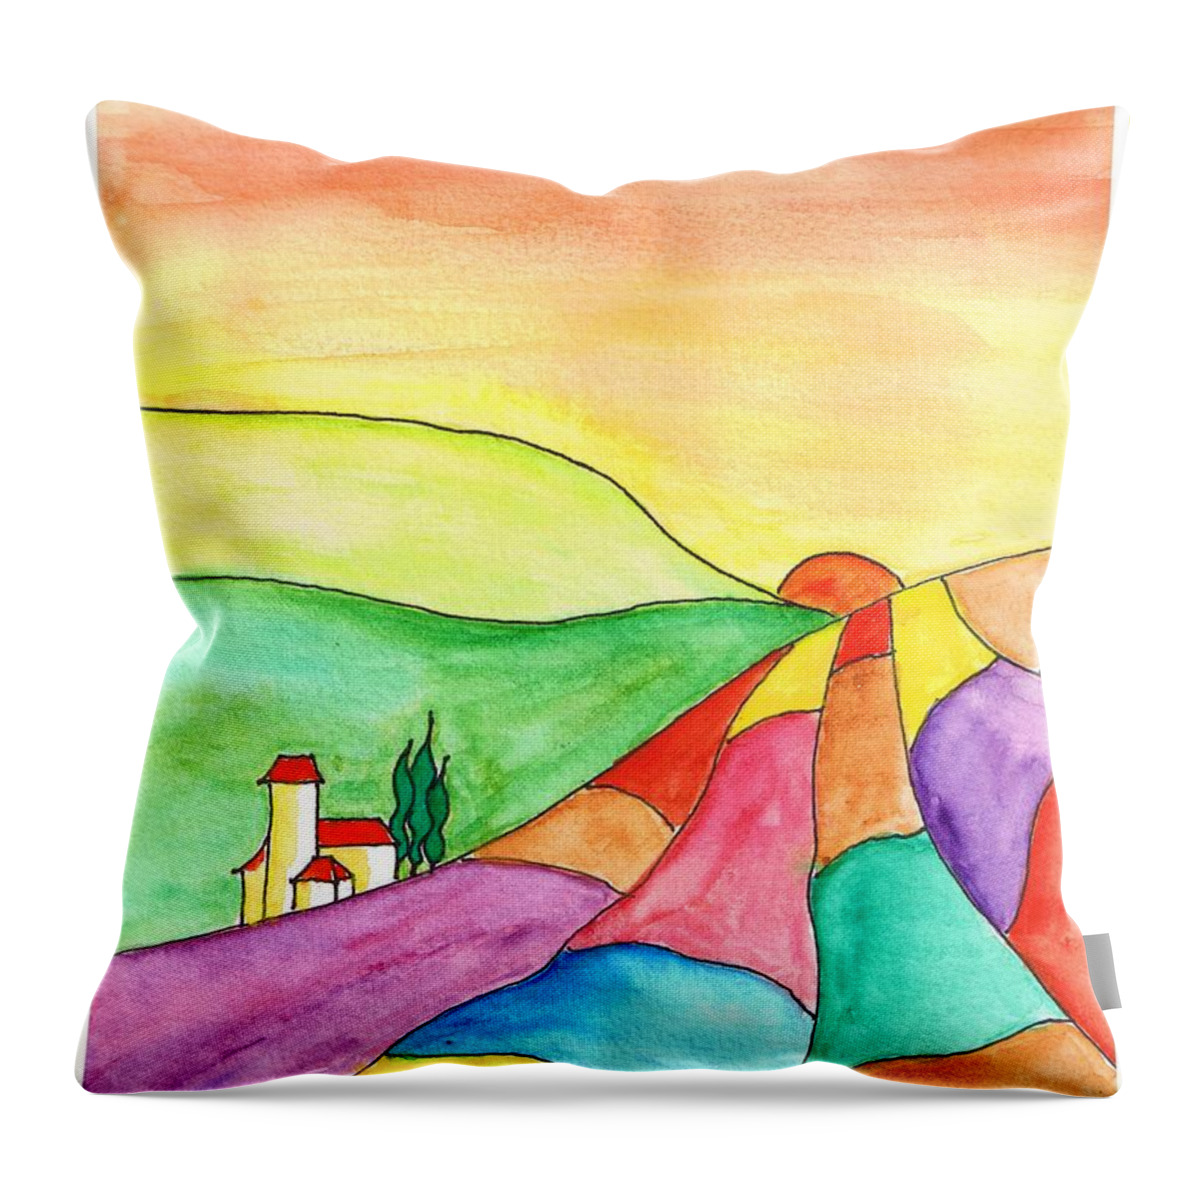 Tuscany Throw Pillow featuring the painting Under The Tuscany Sun by Irene Czys